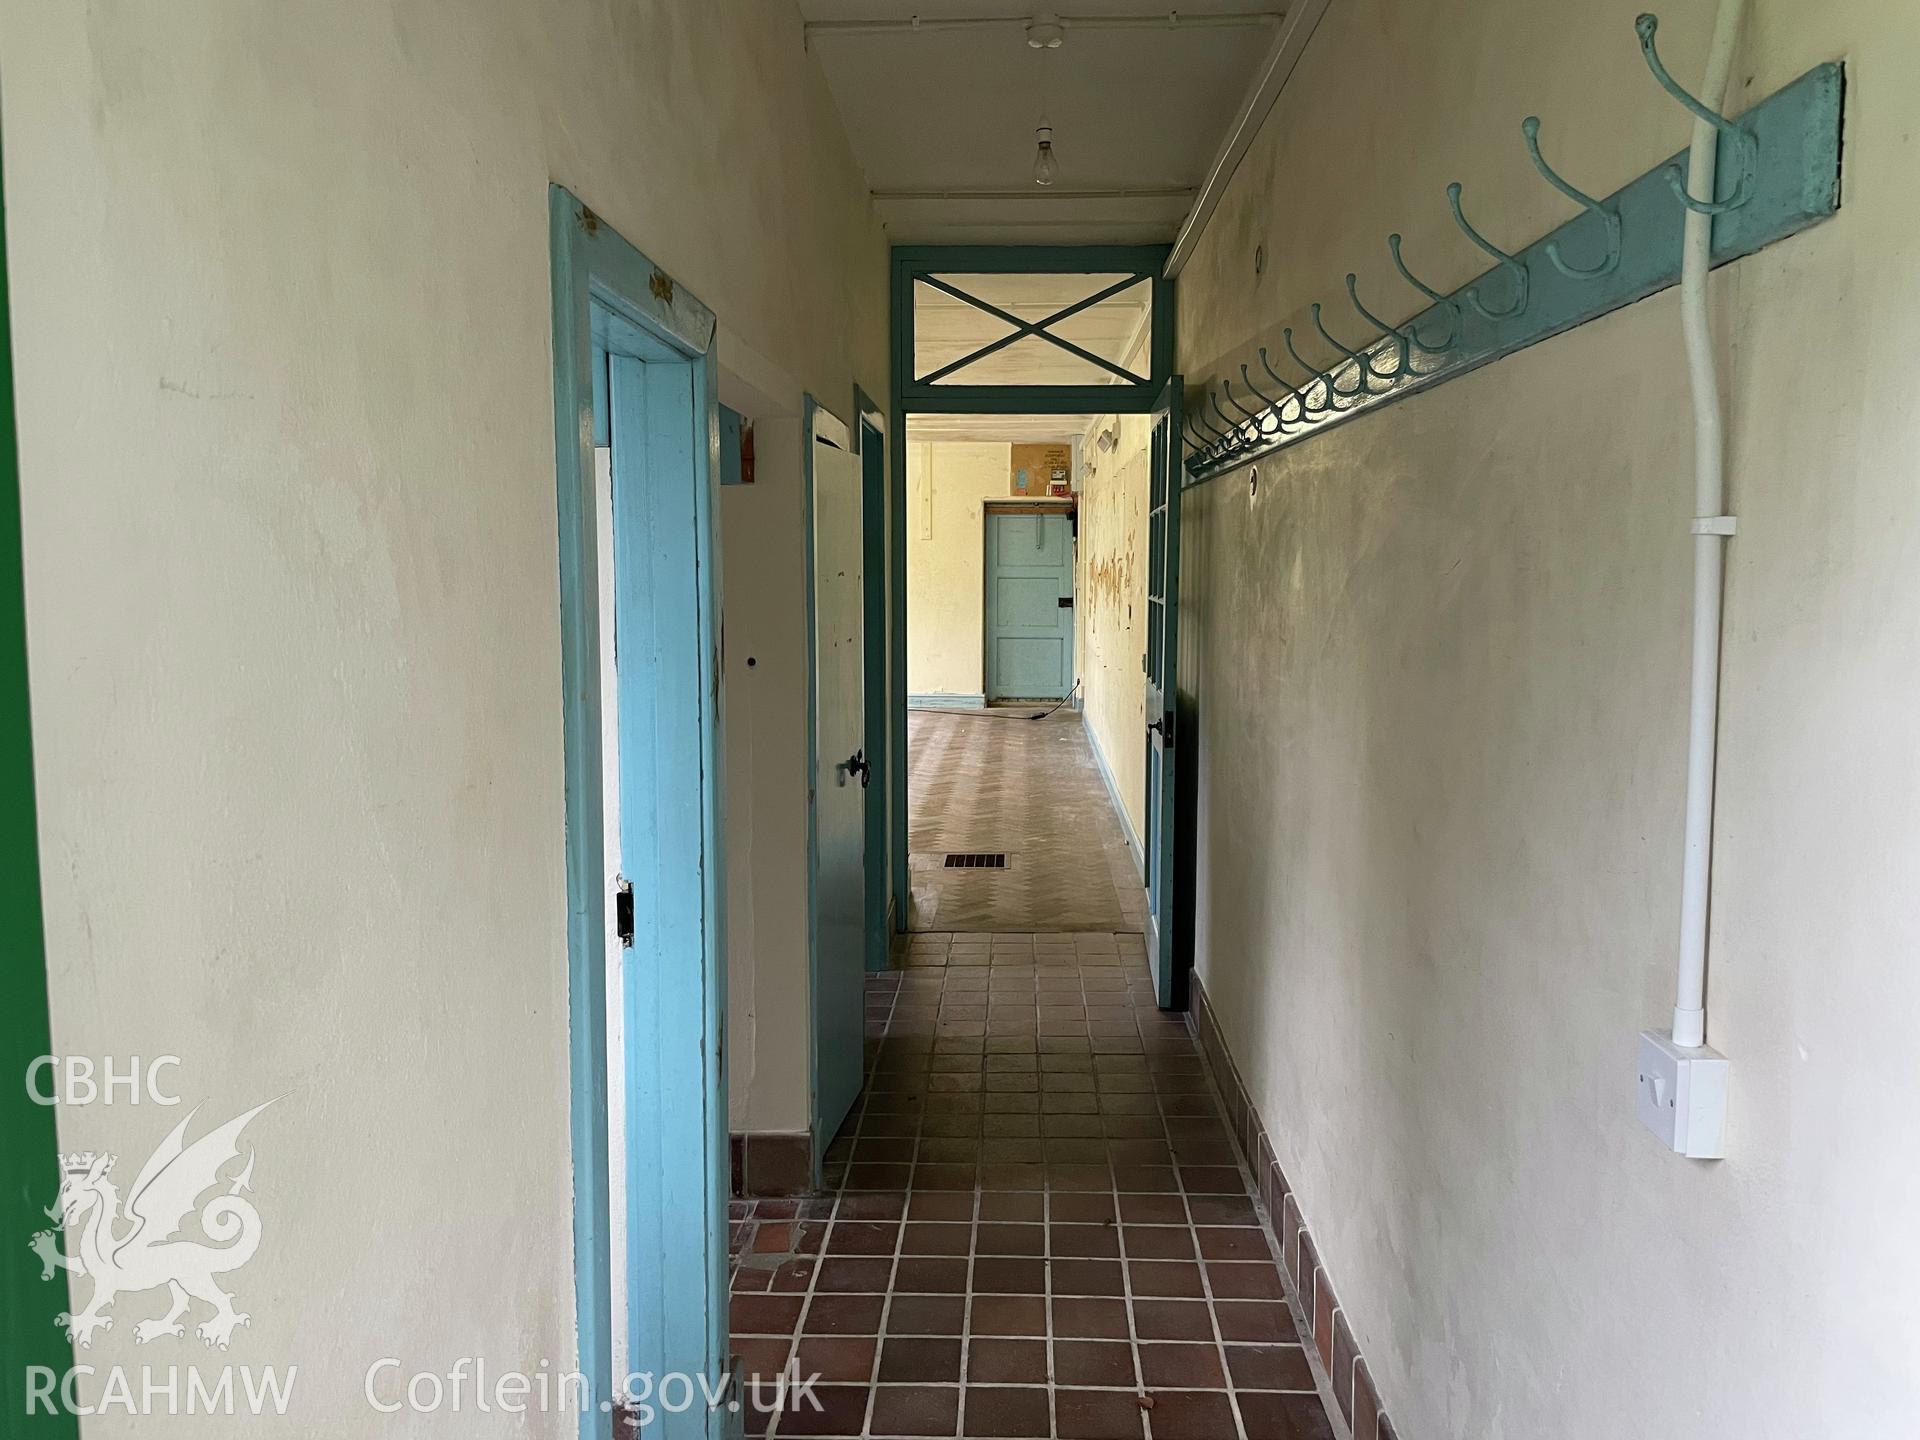 Colour photograph showing Schoolroom corridor, facing north - part of a photographic record relating to Moriah Chapel, Llanystumdwy, produced as a condition of planning consent (Planning Reference C21/0420/41/LL; Gwynedd Council).